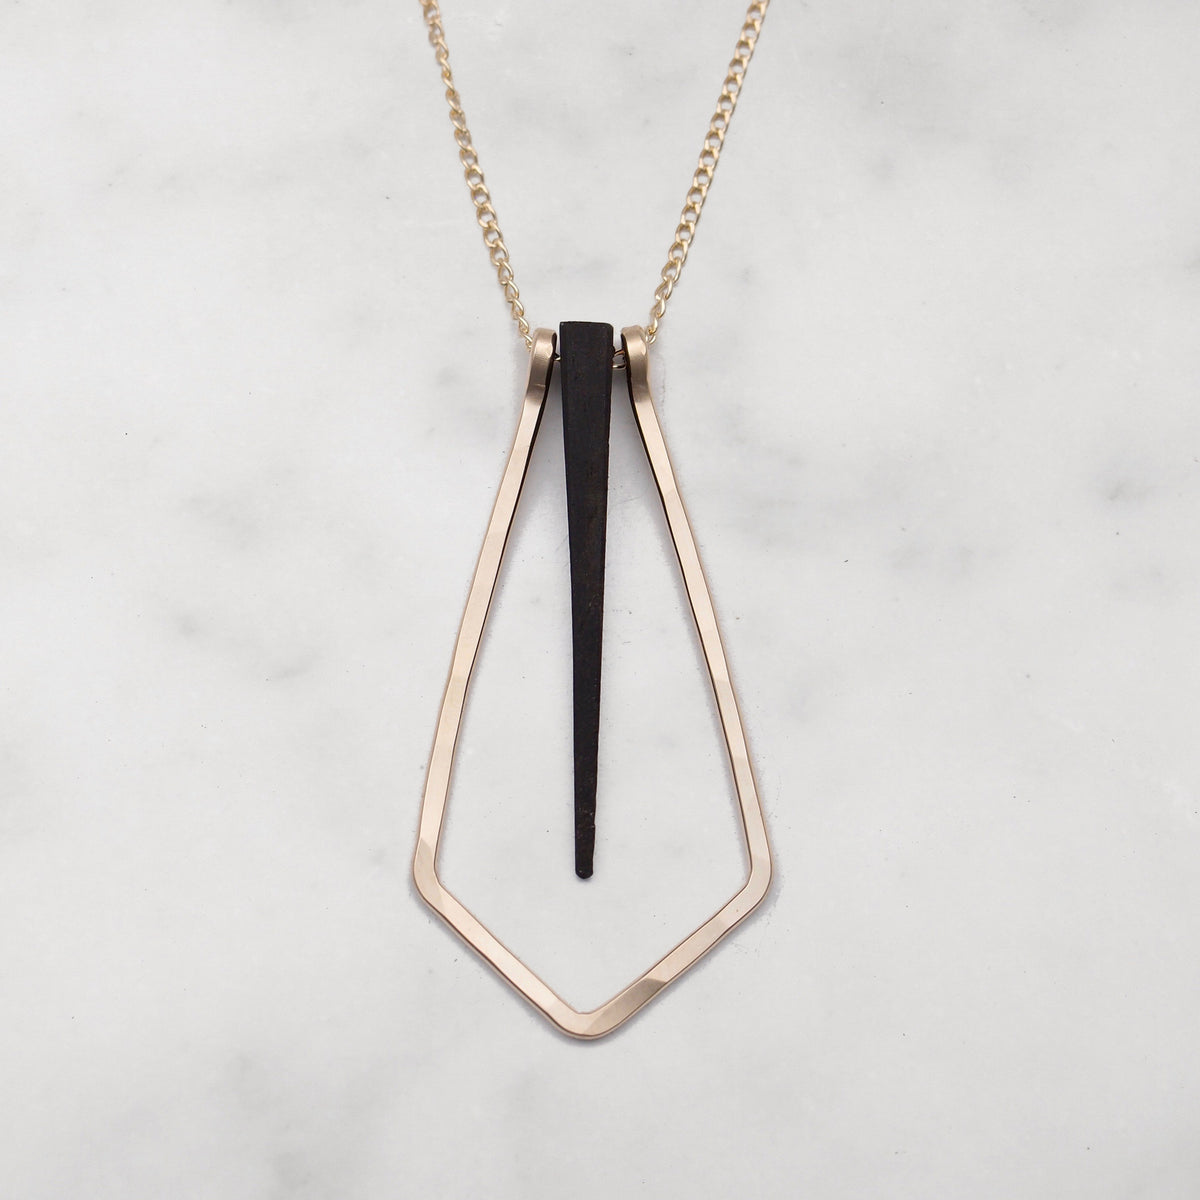 Tai Necklace - 14k Gold Fill